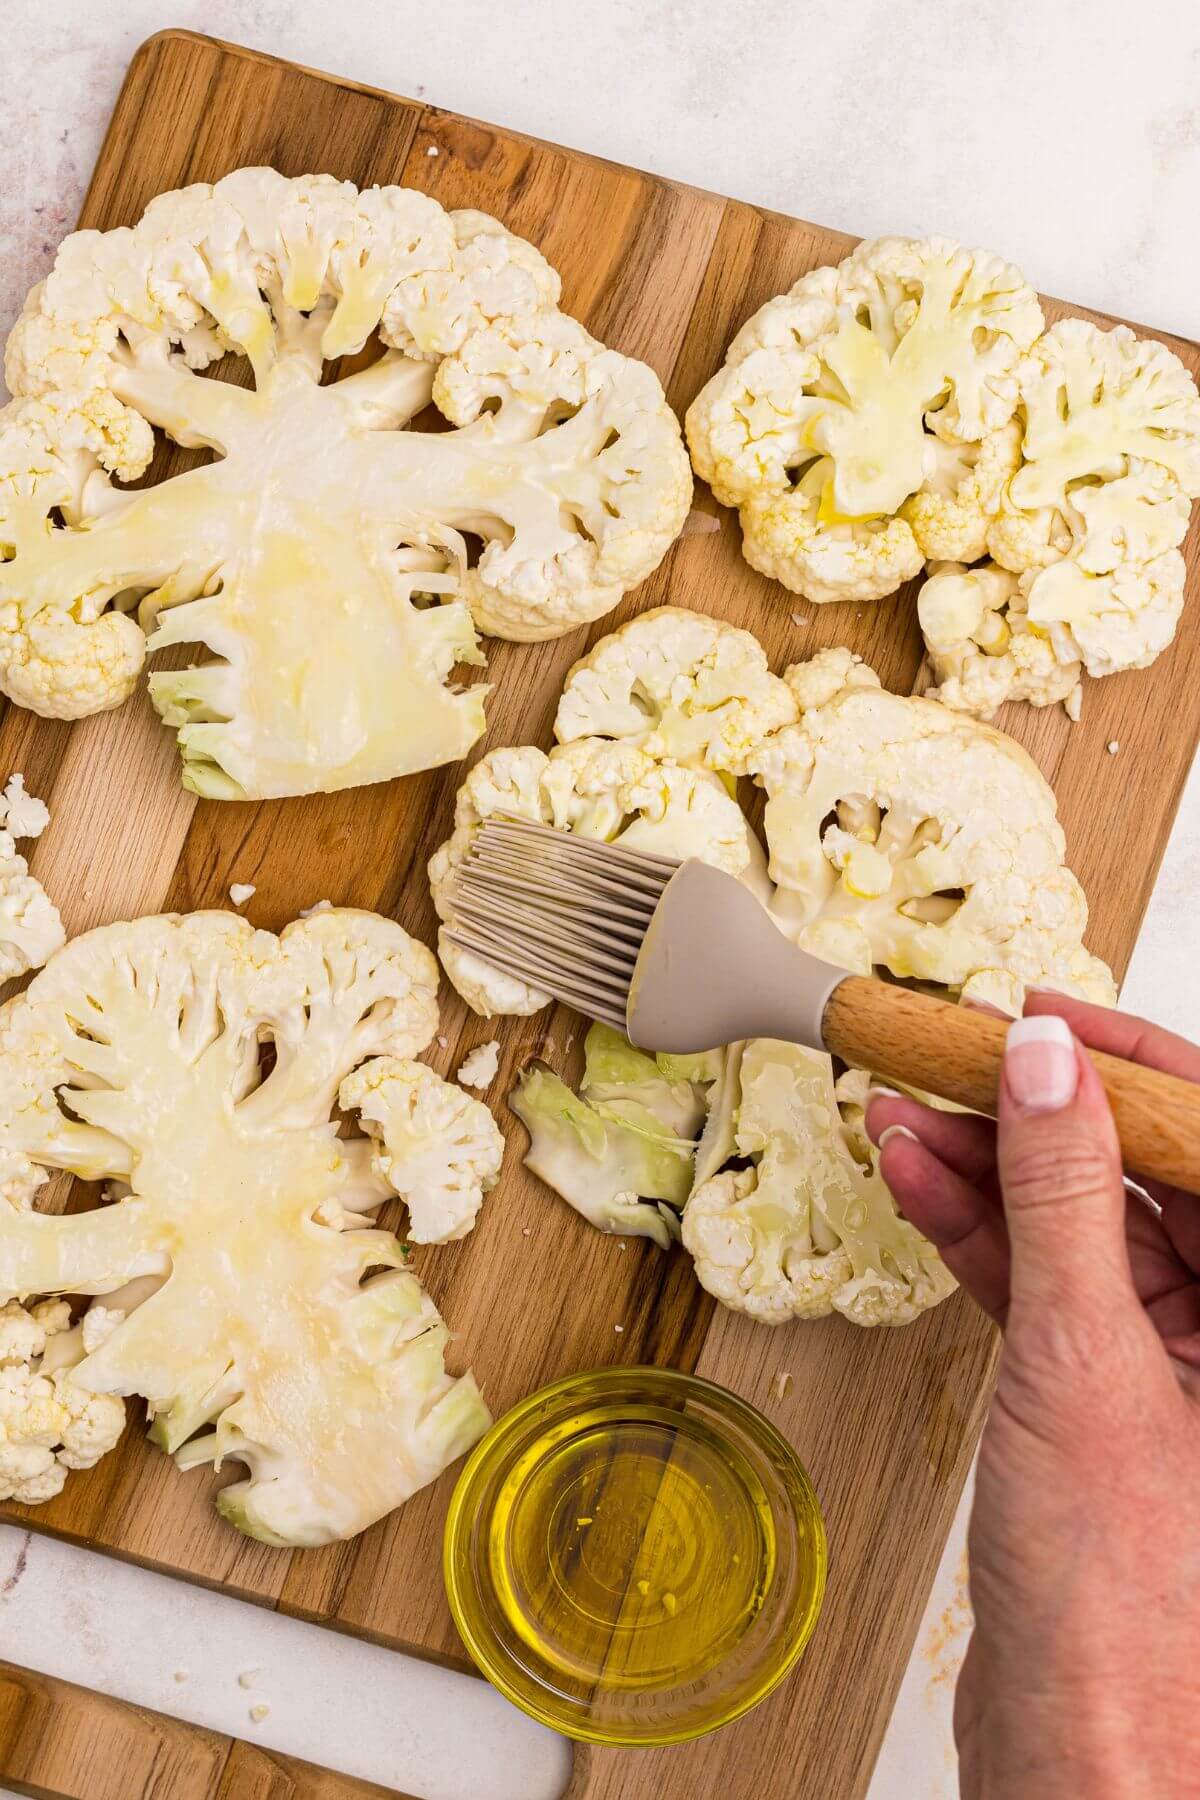 Uncooked cauliflower steaks on a wooden cutting board being brushed with olive oil.